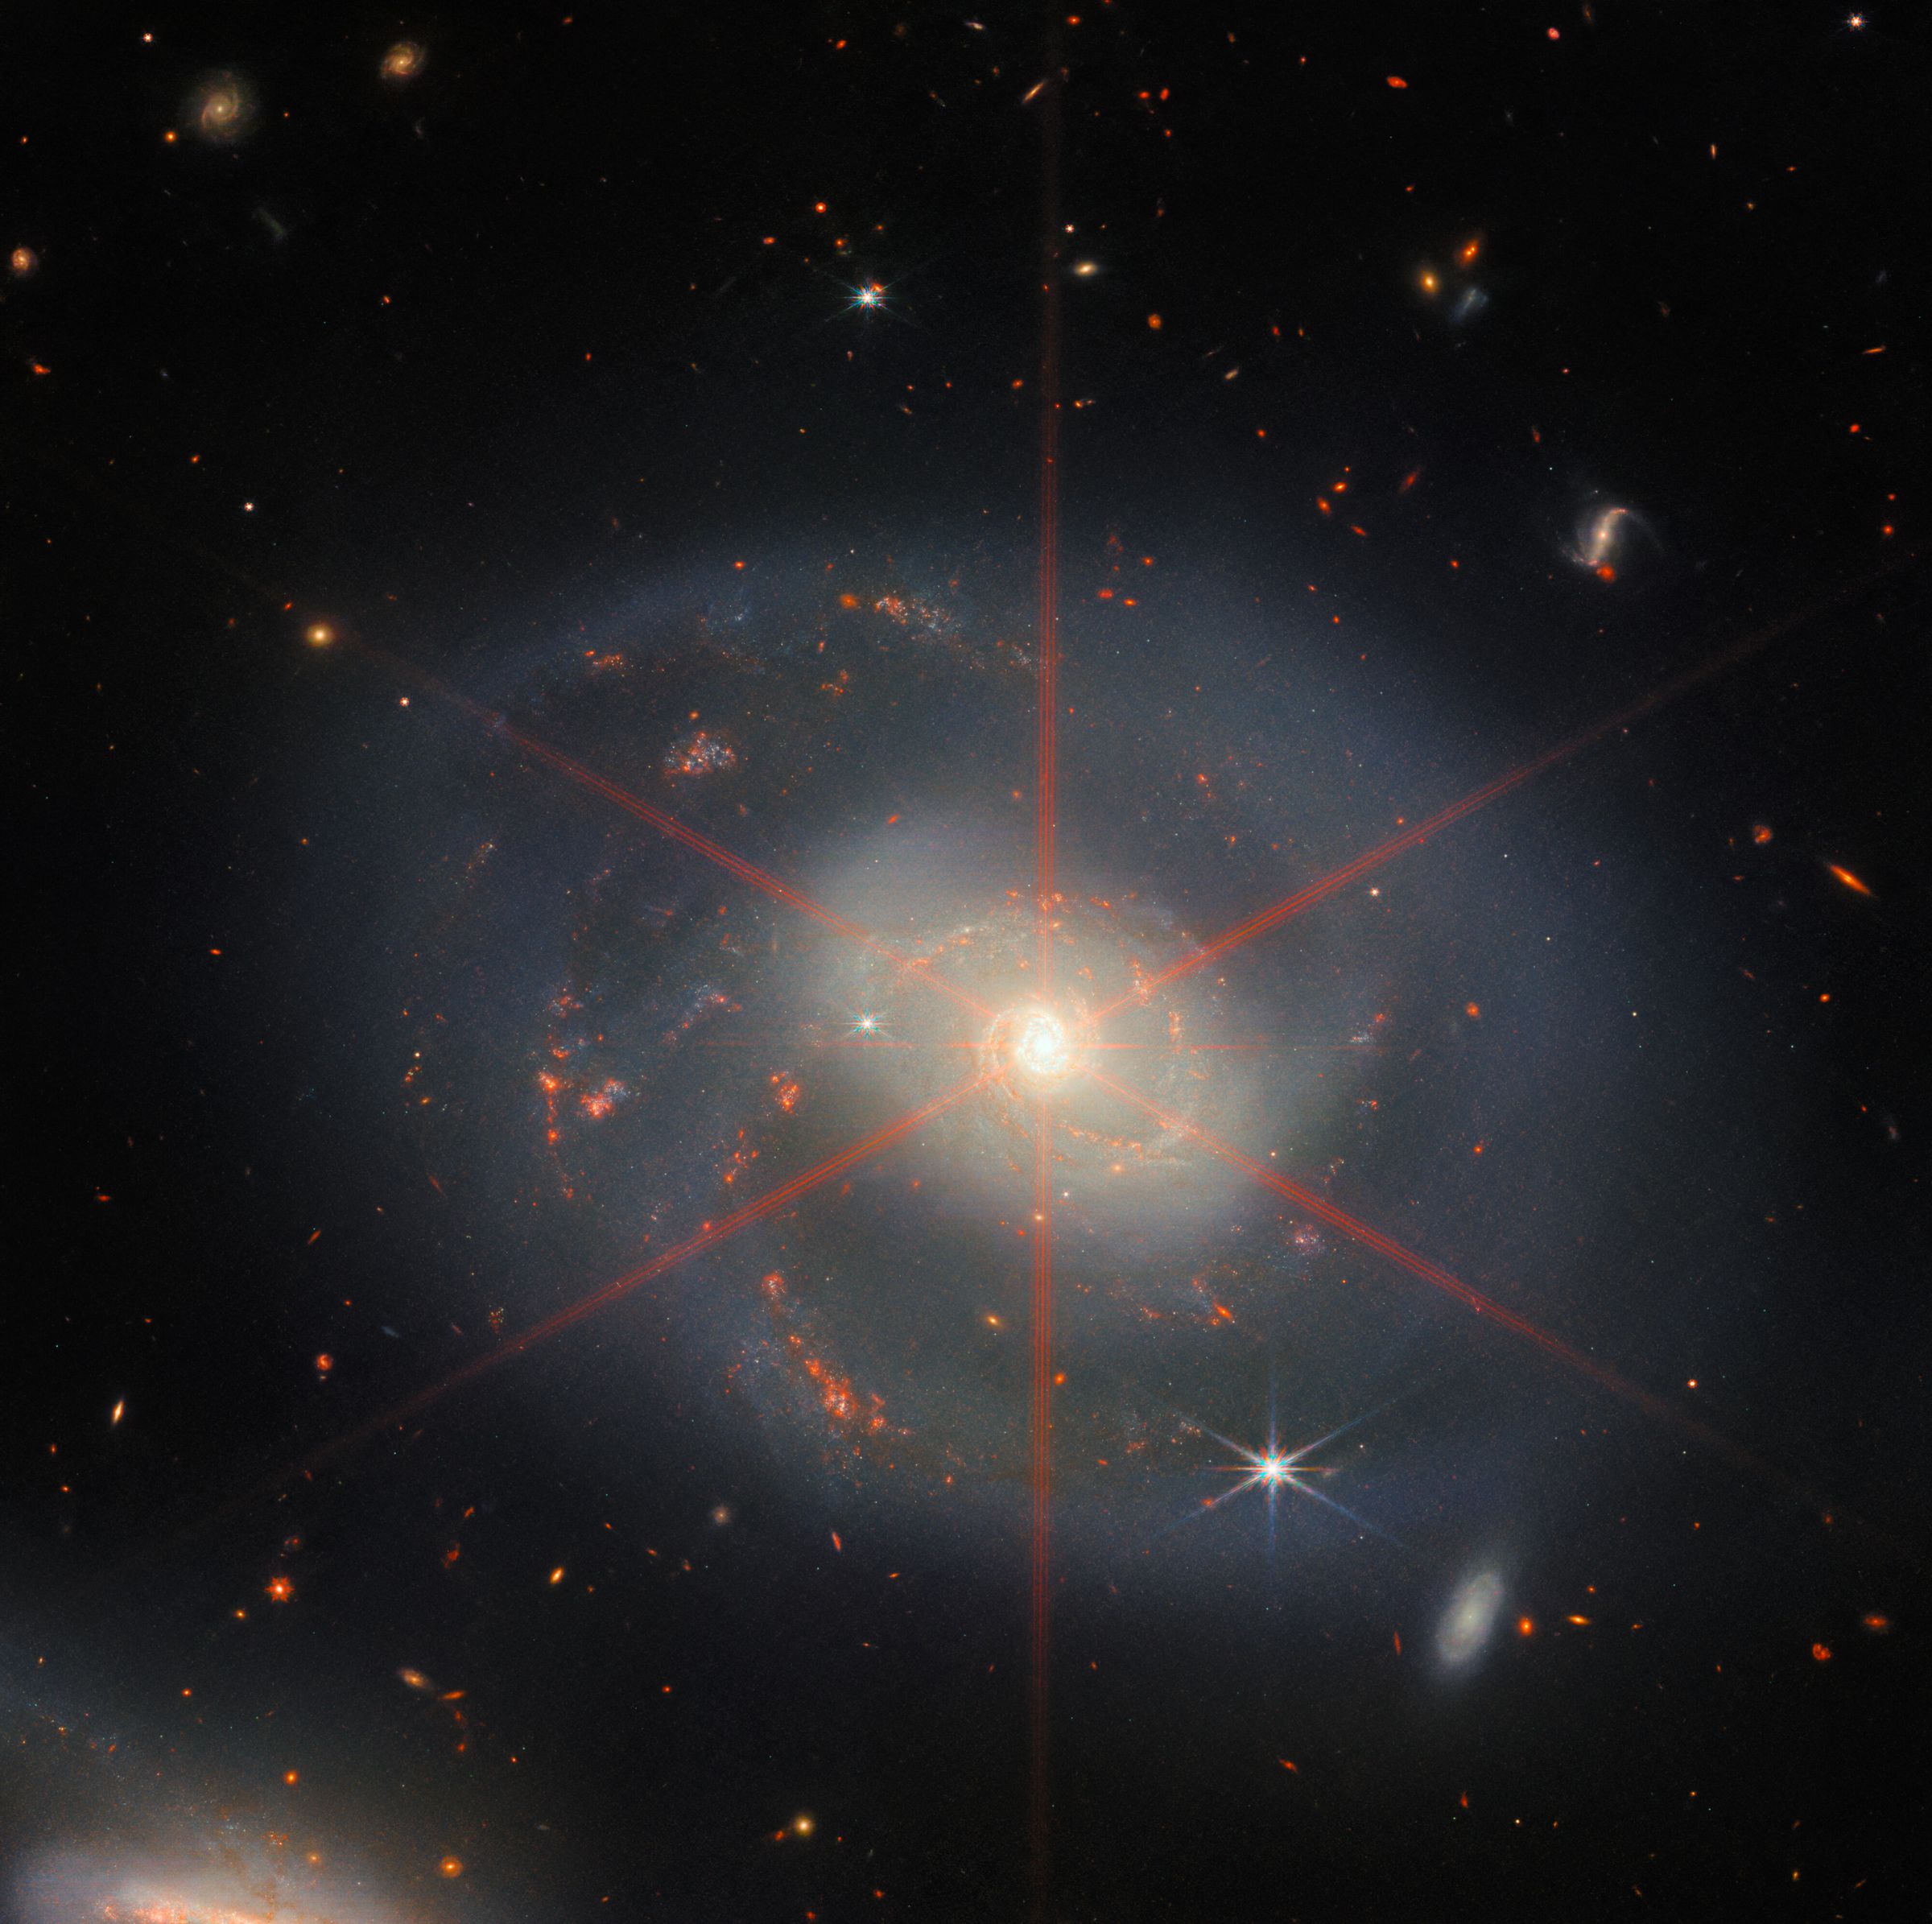 This image shows a spiral galaxy dominated by a bright central region.  The galaxy has blue-purple hues with orange-red regions filled with stars.  A large diffraction spike can also be seen, which appears as a stellar pattern over the central region of the galaxy.  Lots of stars and galaxies fill the background scenery